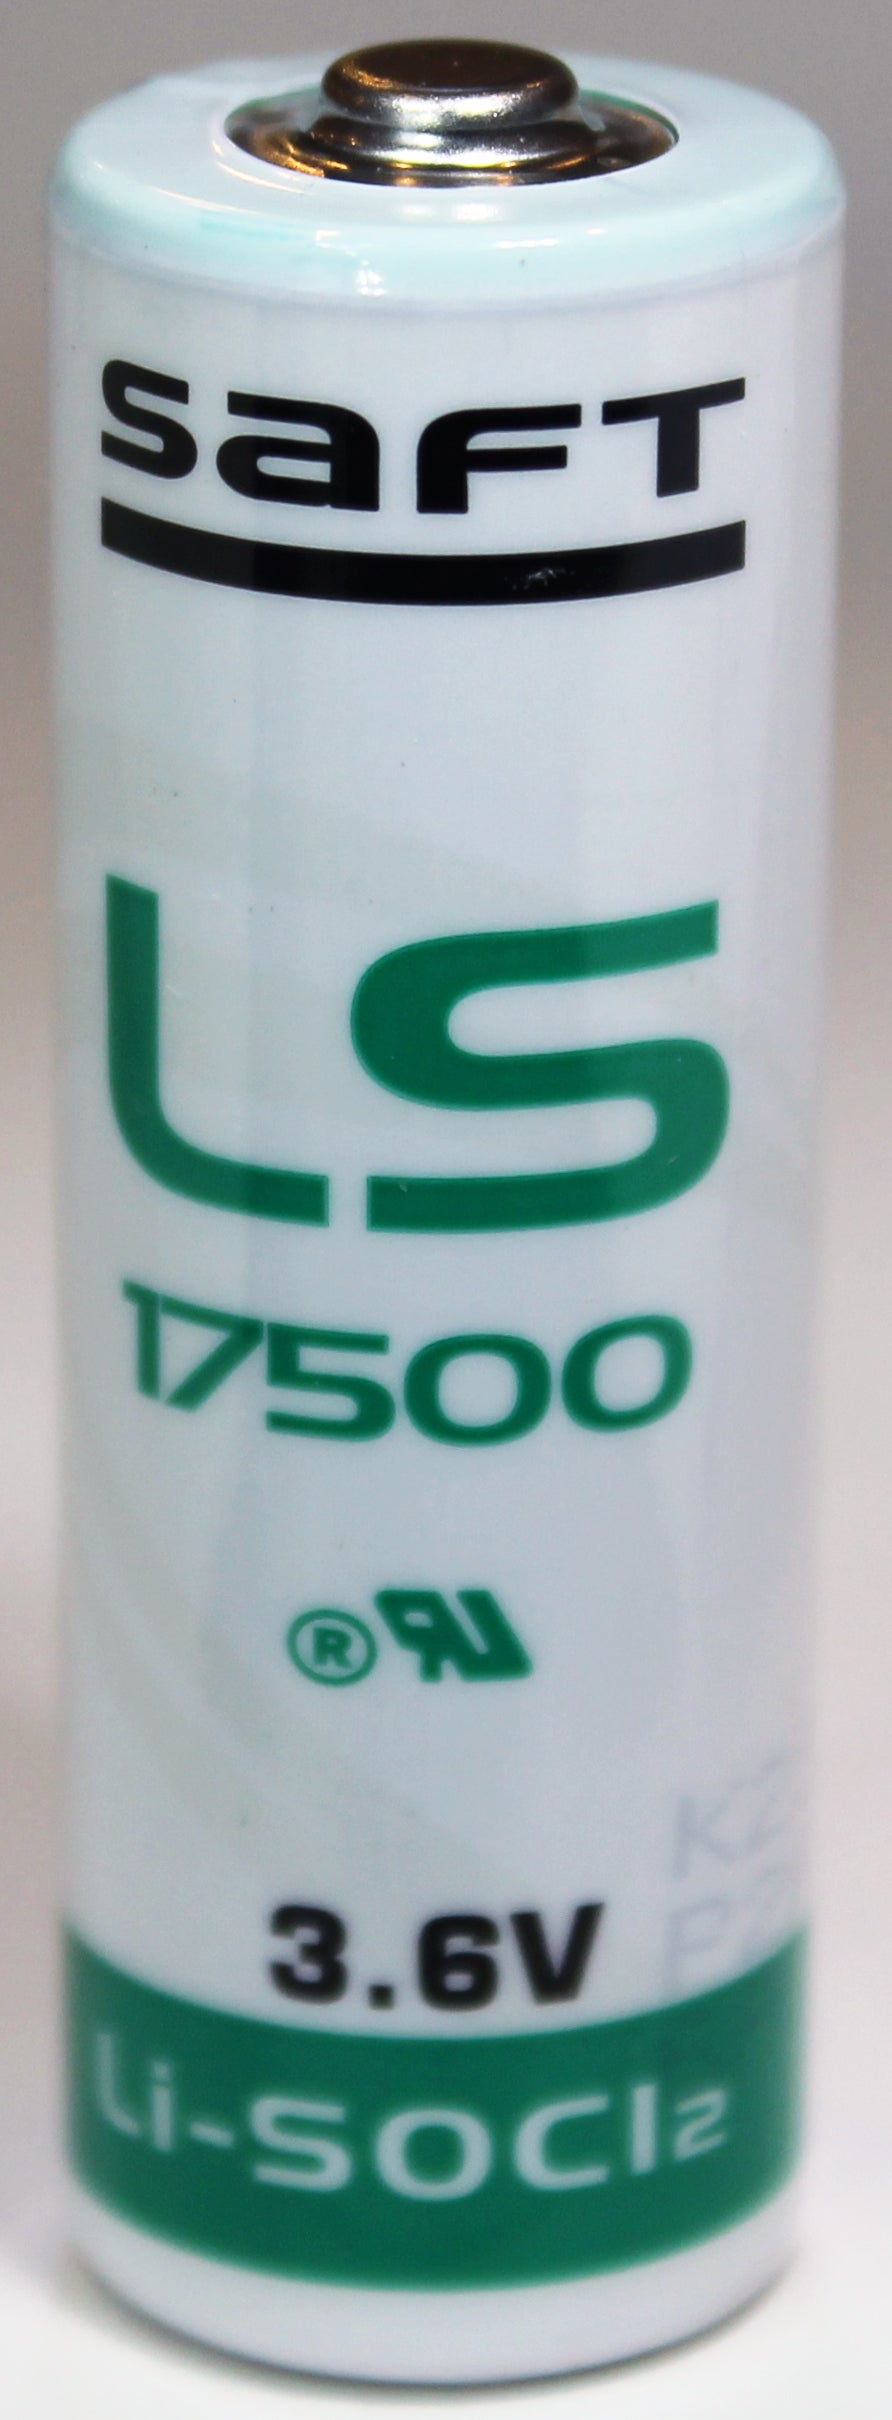 For SAFT LS17500 A STD 3.6V Lithium Thionyl Chloride Battery